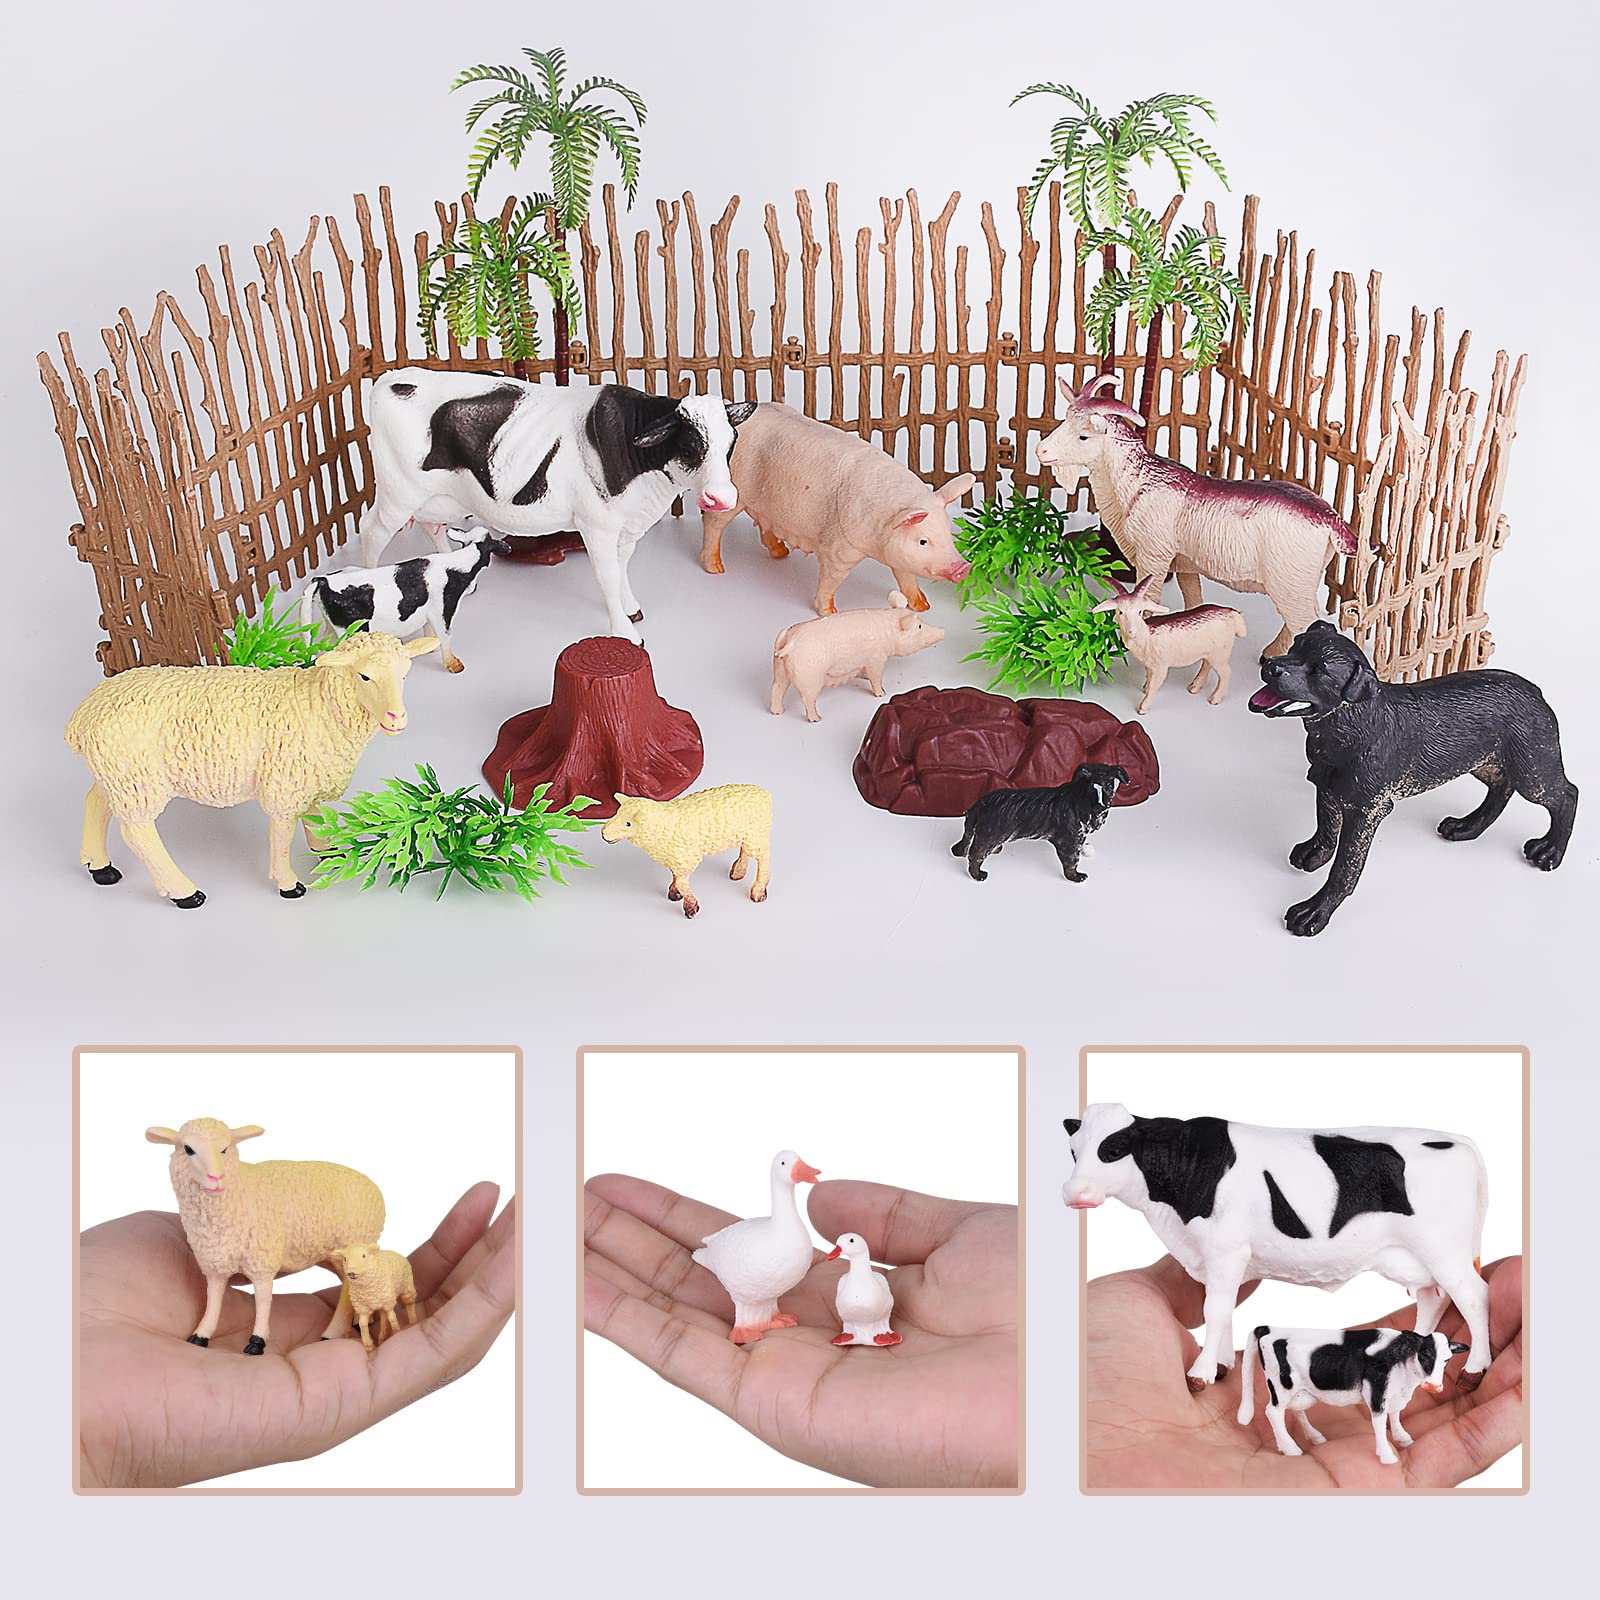 EnAuRoL 35 PCS Farm Animals Toys for Toddlers 3 Years Old Boys and Girls Realistic Animal Figures Playsets Toys for Kids 3~8 Christmas Birthday Gift